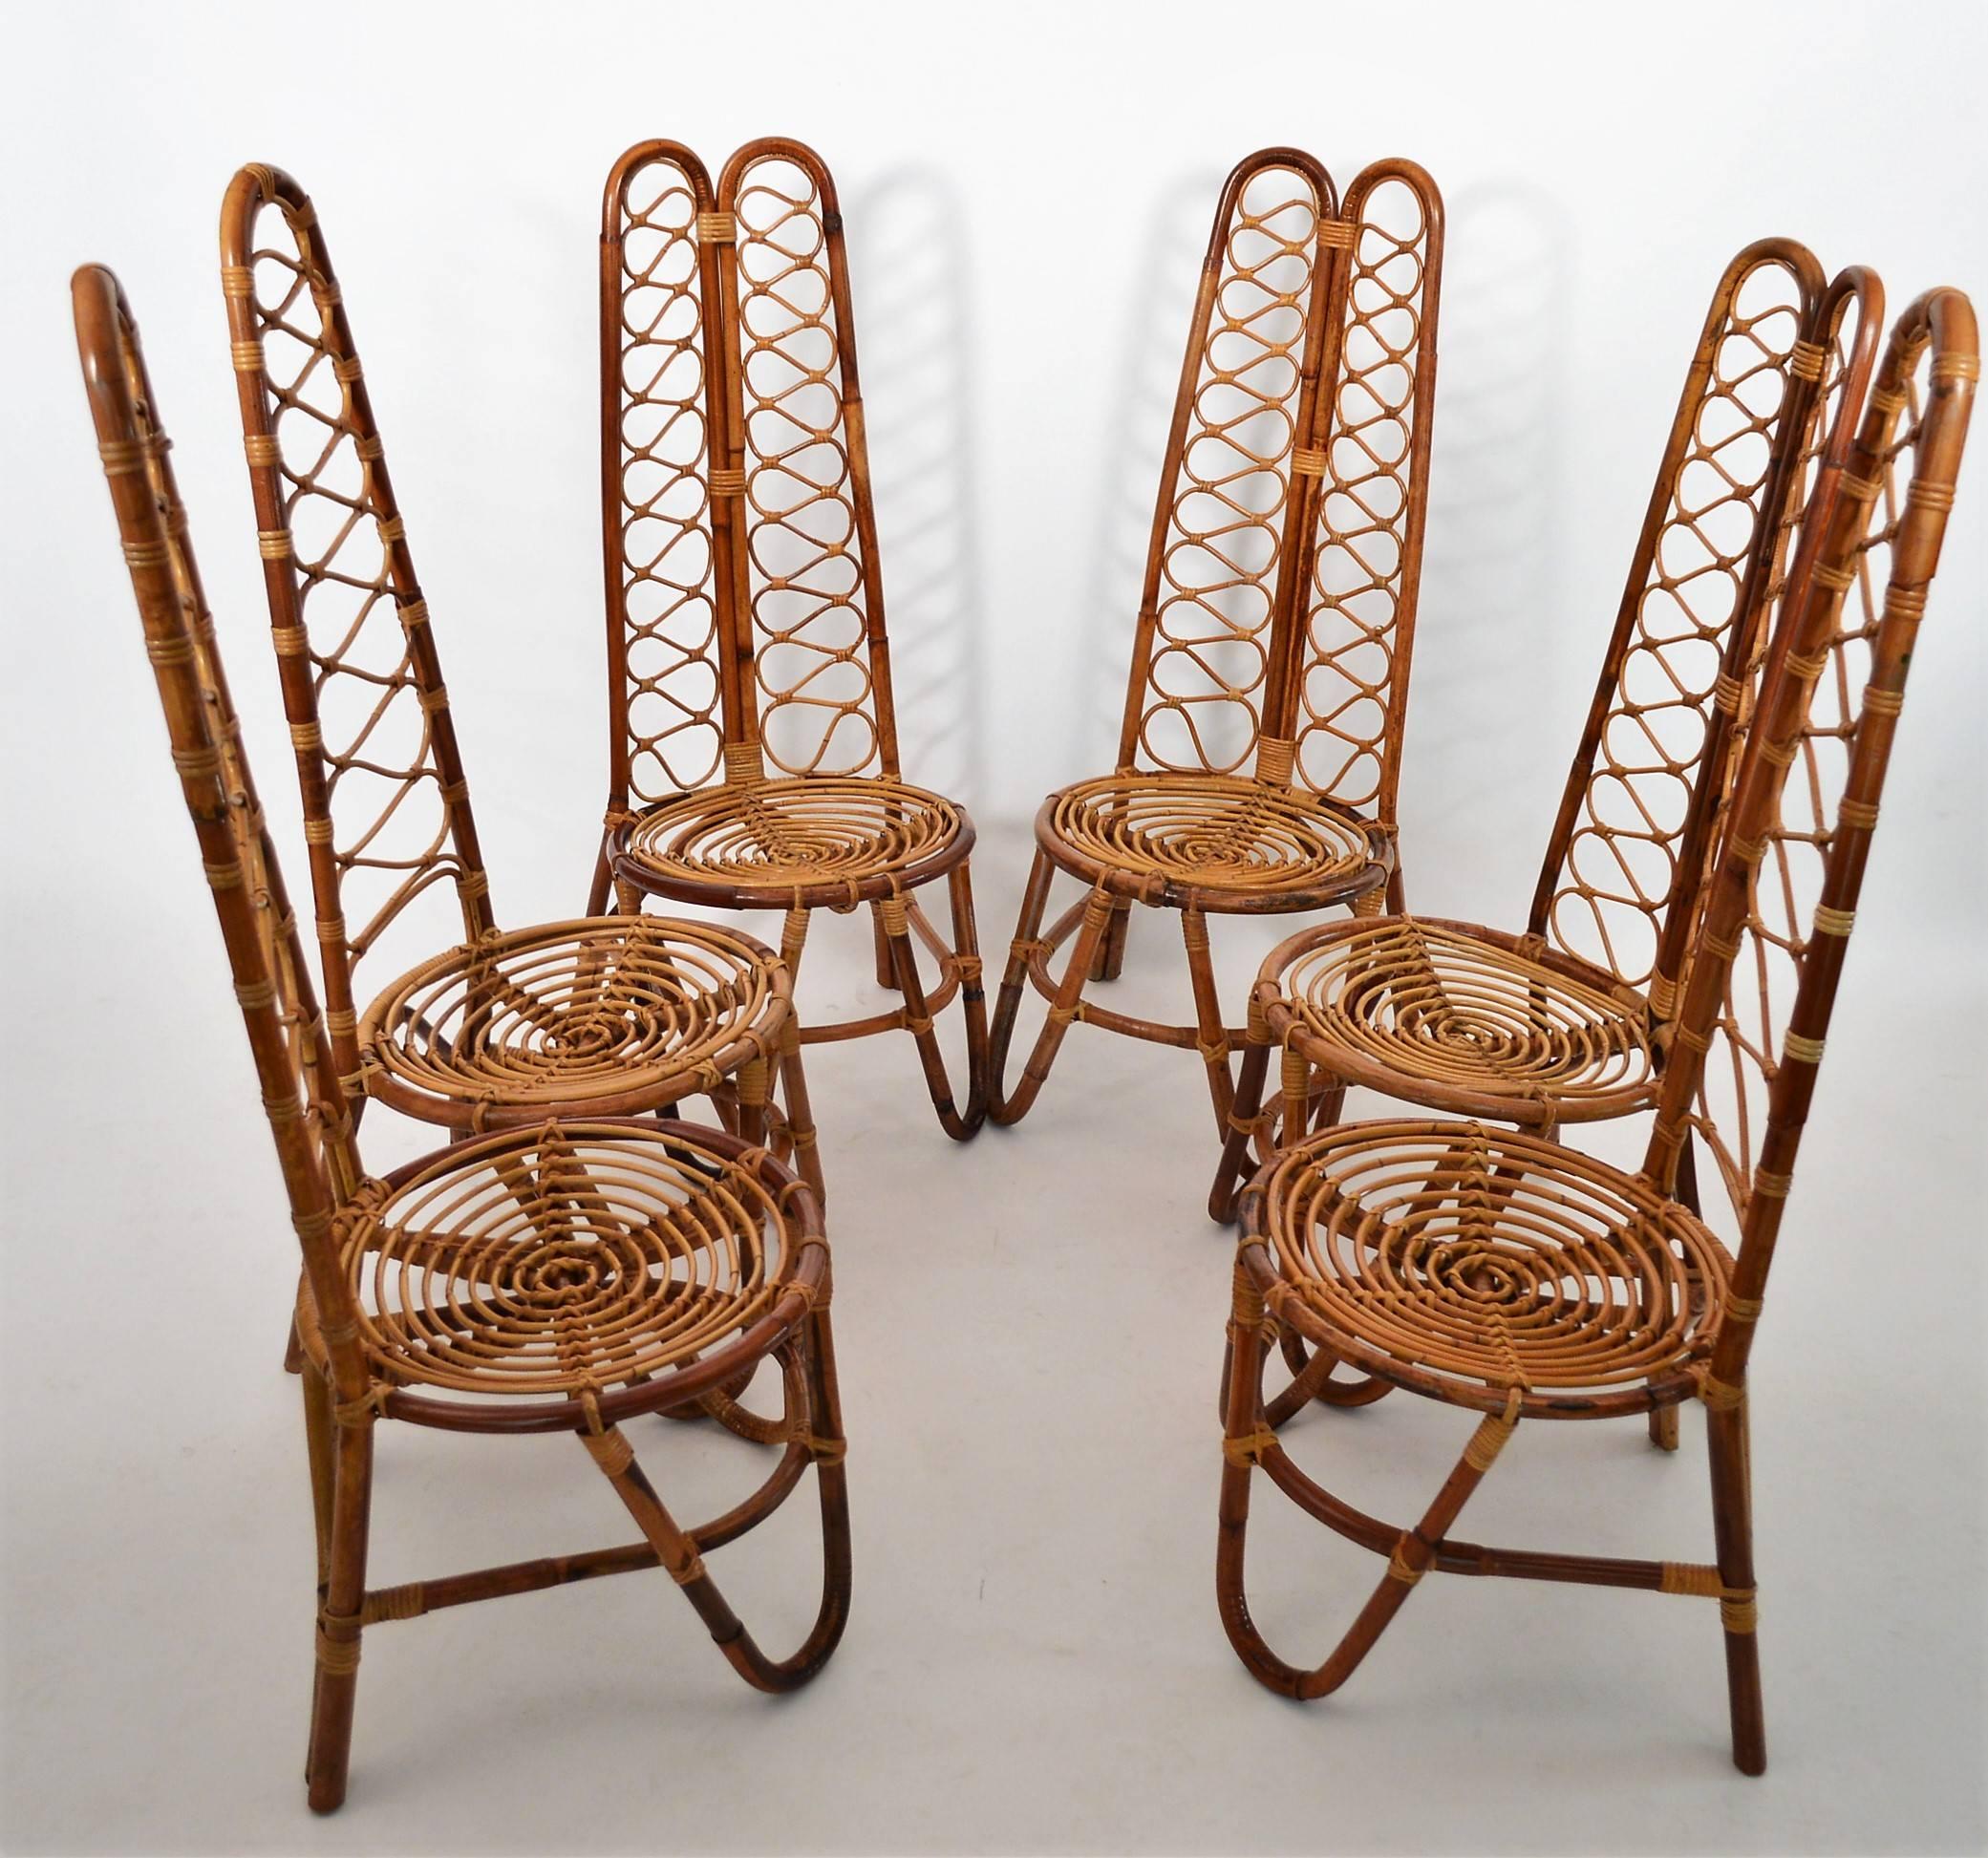 Hand-Crafted French Riviera Midcentury Bamboo Chairs, Set of Six